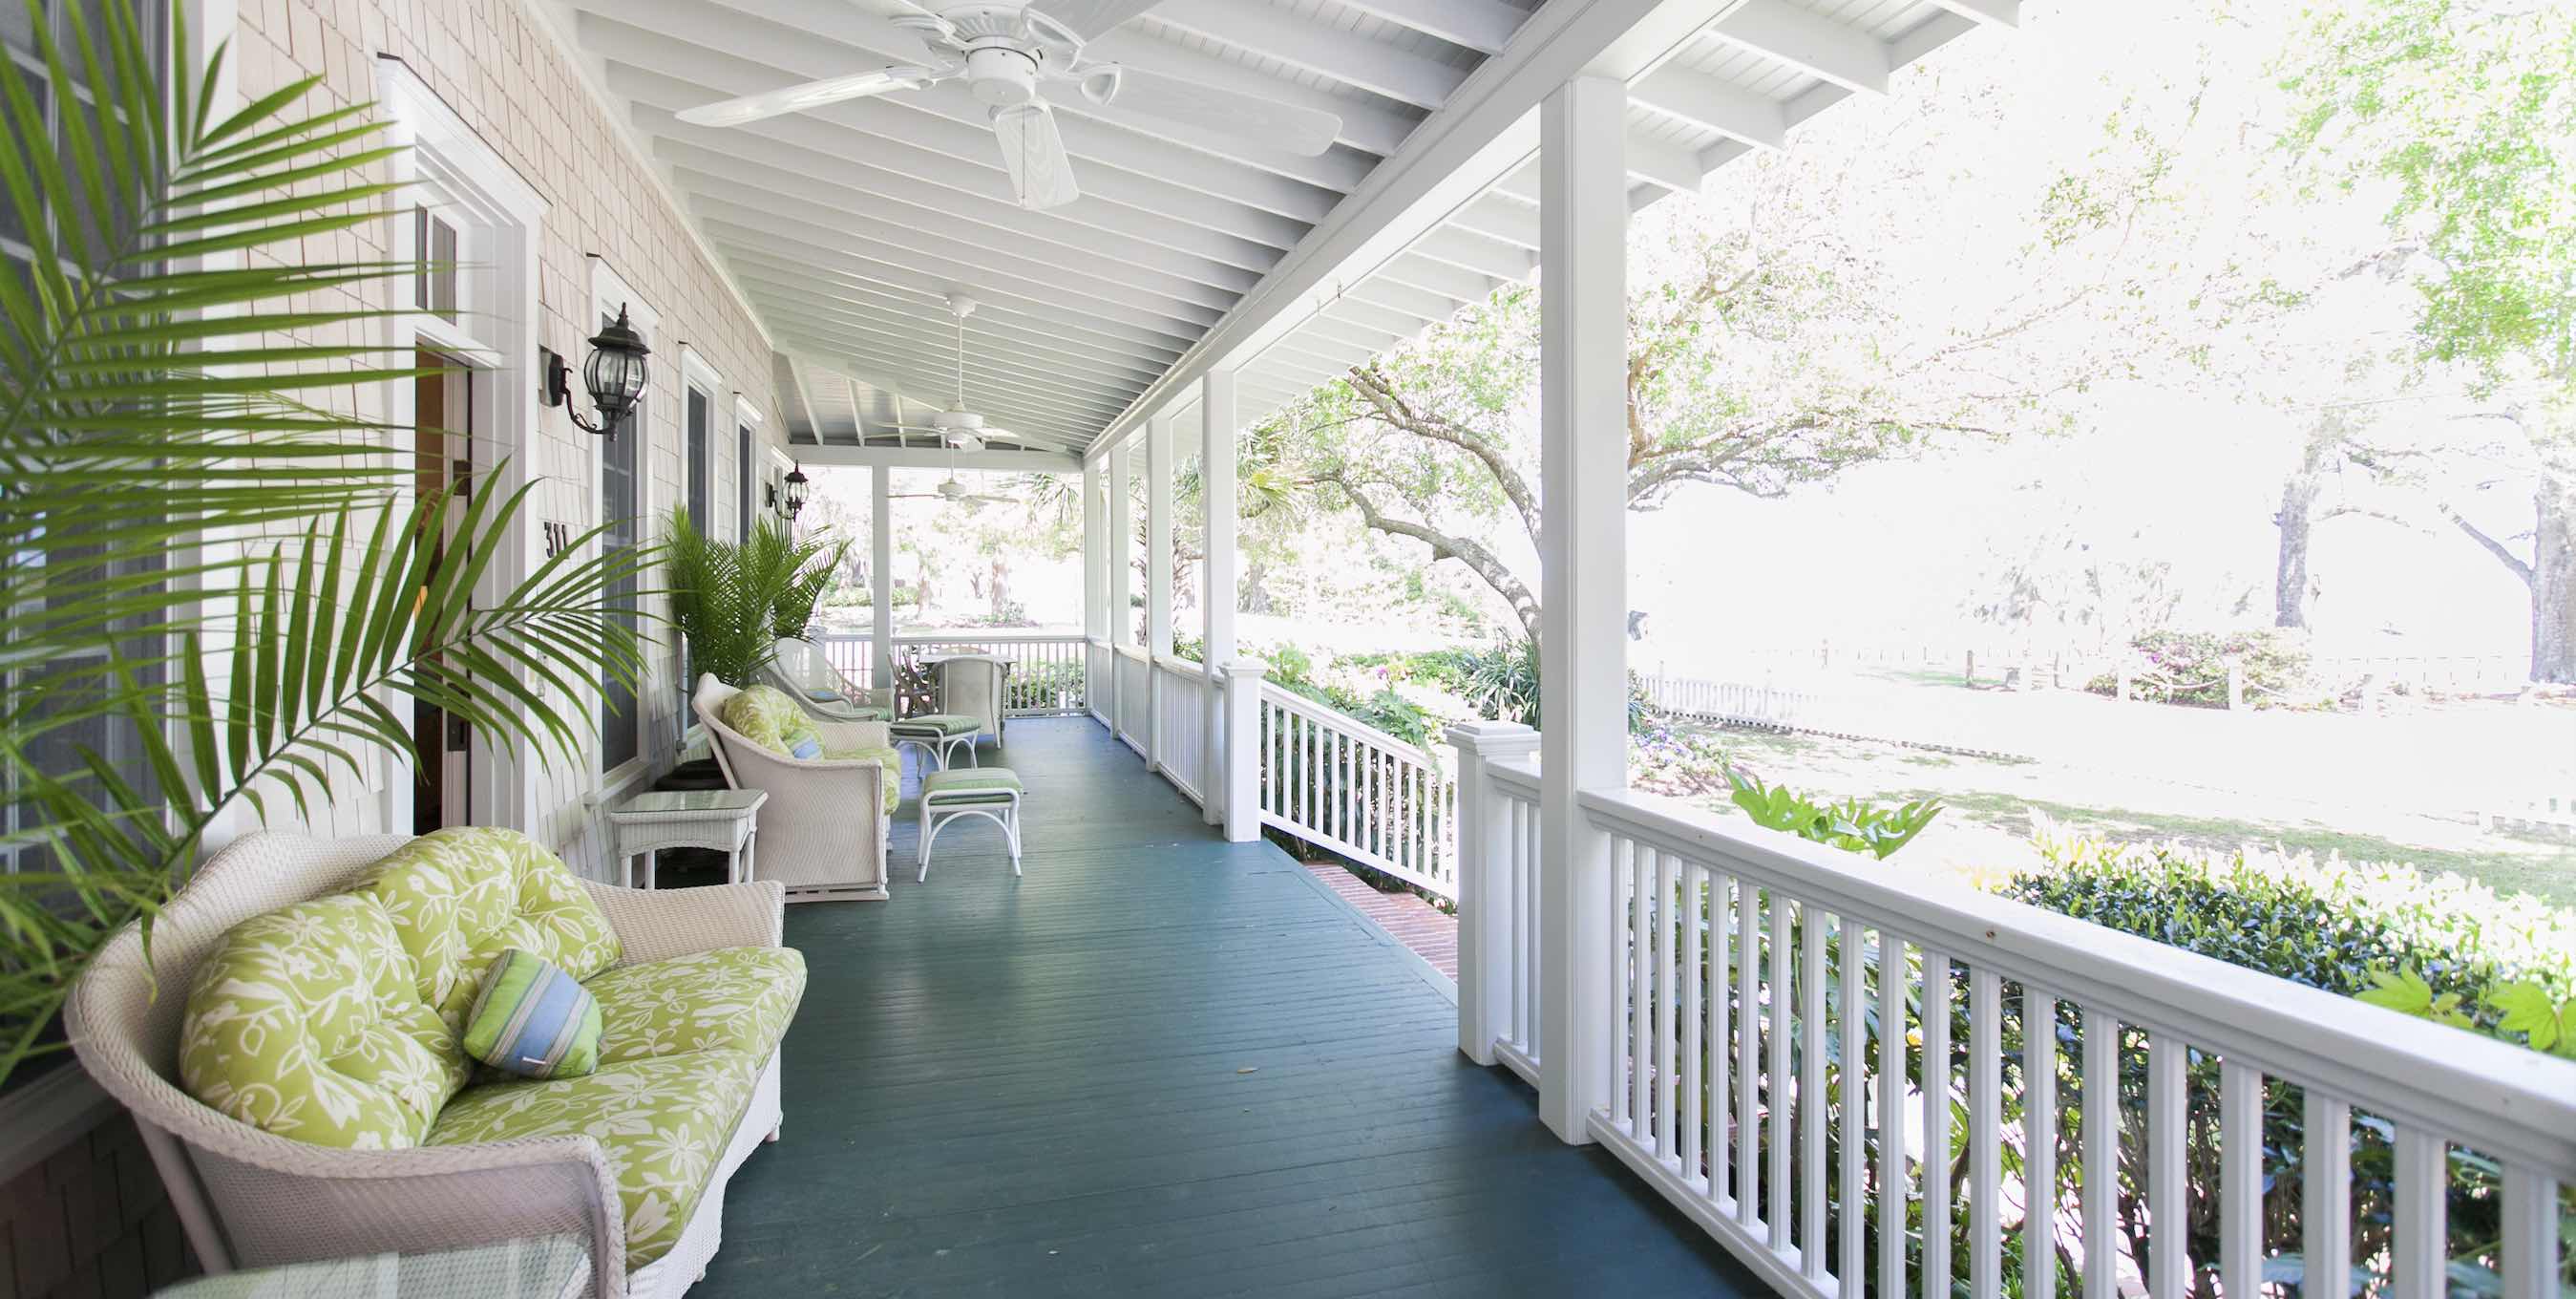 Picture of house with plants and seats on front porch to represent the sub-title Enhance Your Front Entrance